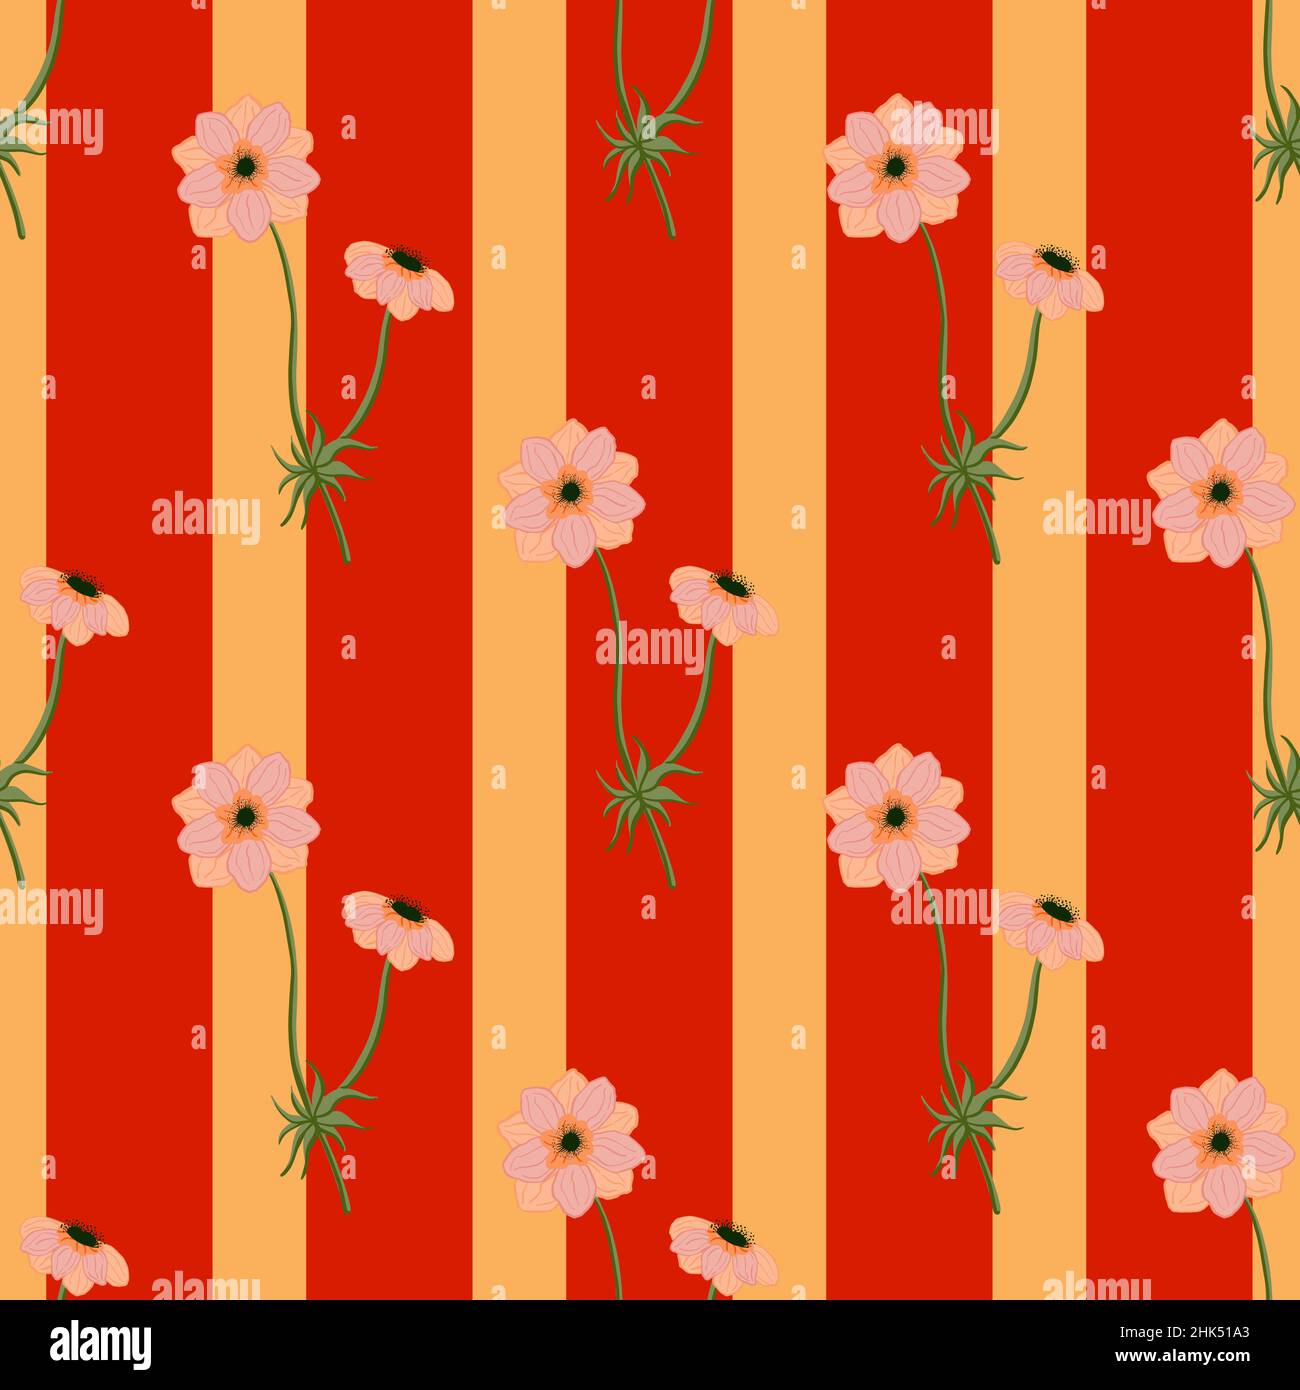 Summer seamless pattern with cute pink anemone flowers shapes. Red and orange striped background. Stock illustration. Vector design for textile, fabri Stock Vector